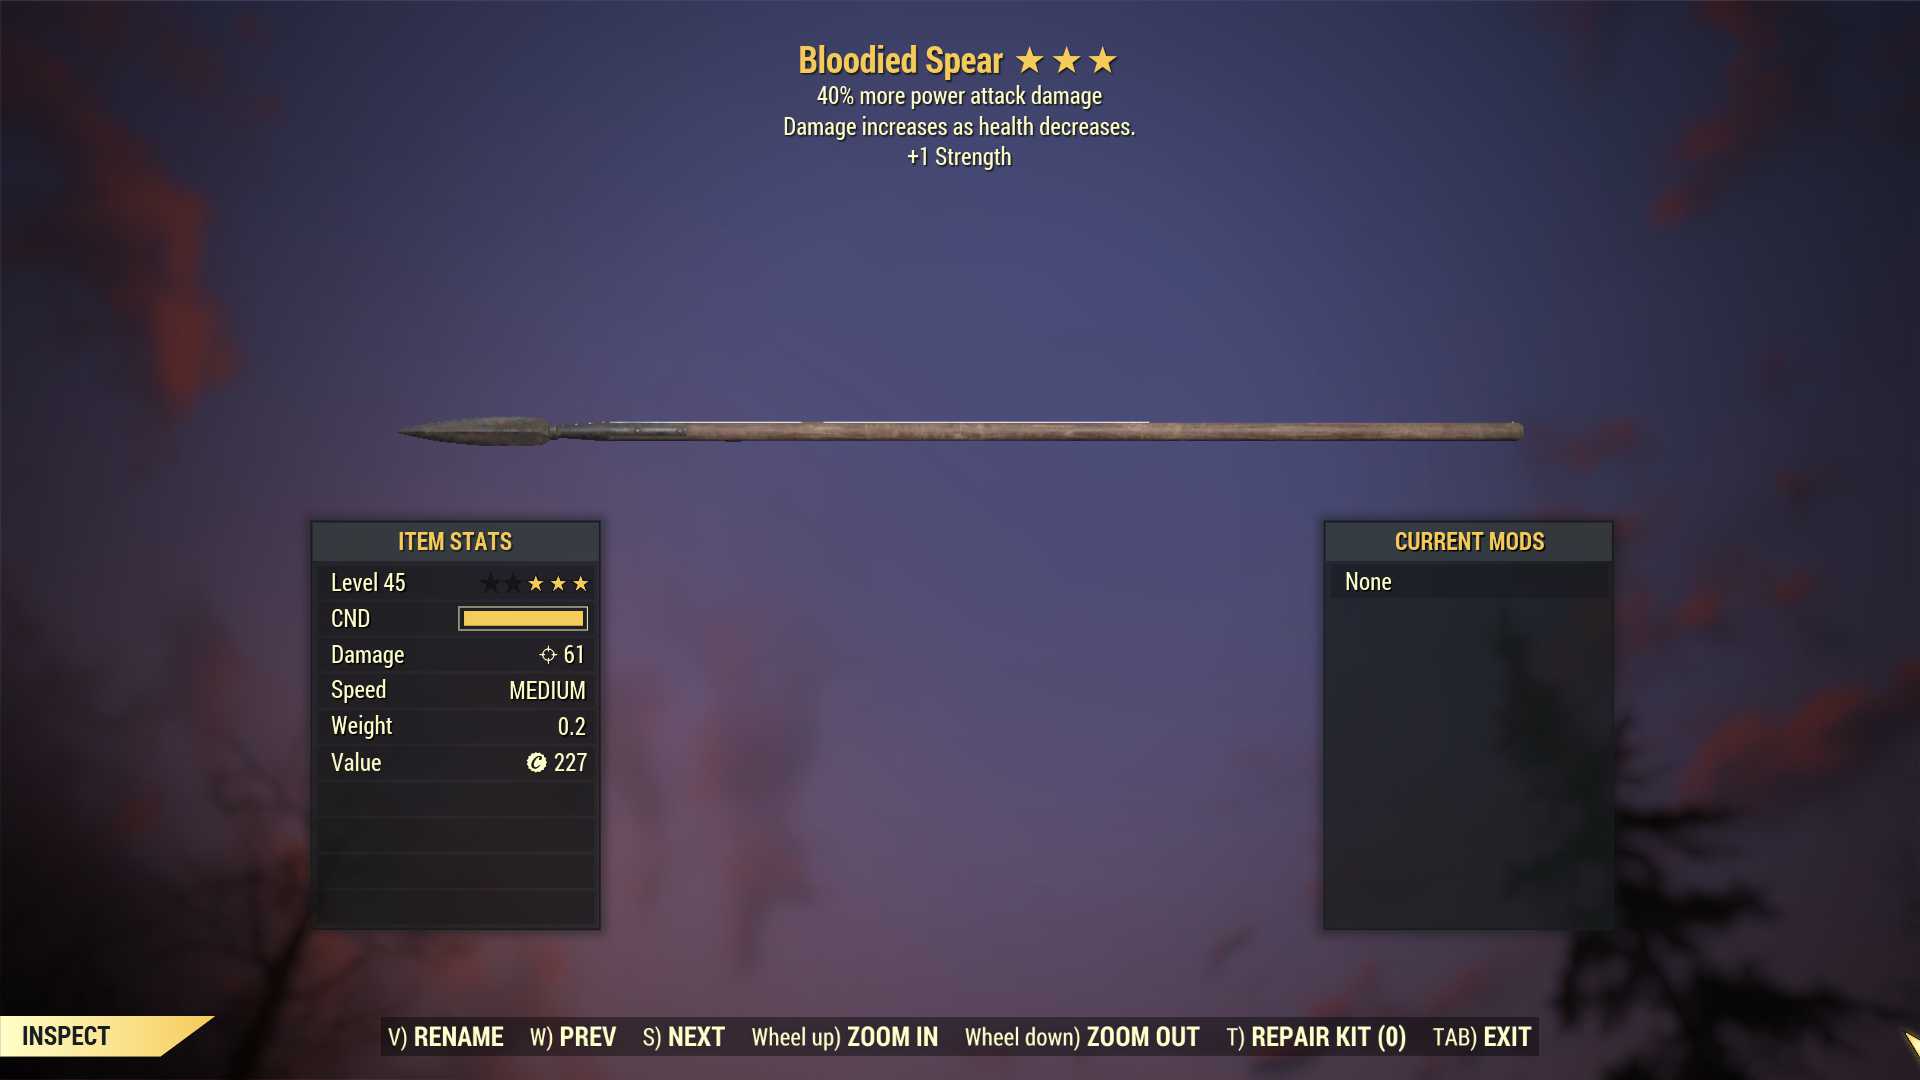 Bloodied Spear (+40% damage PA, +1 Strength)